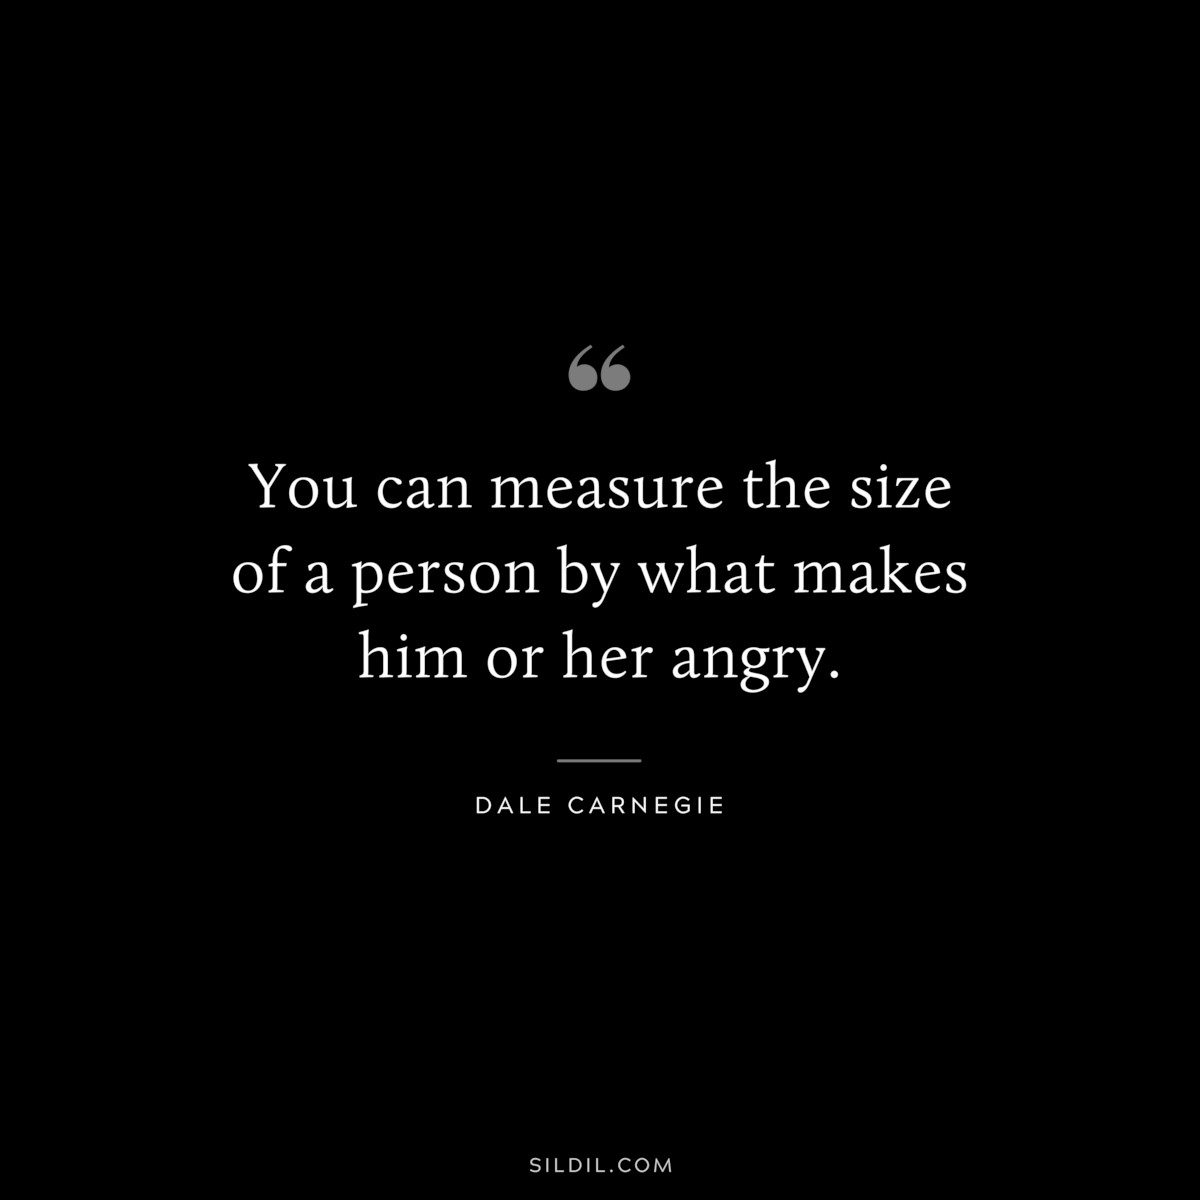 You can measure the size of a person by what makes him or her angry.― Dale Carnegie